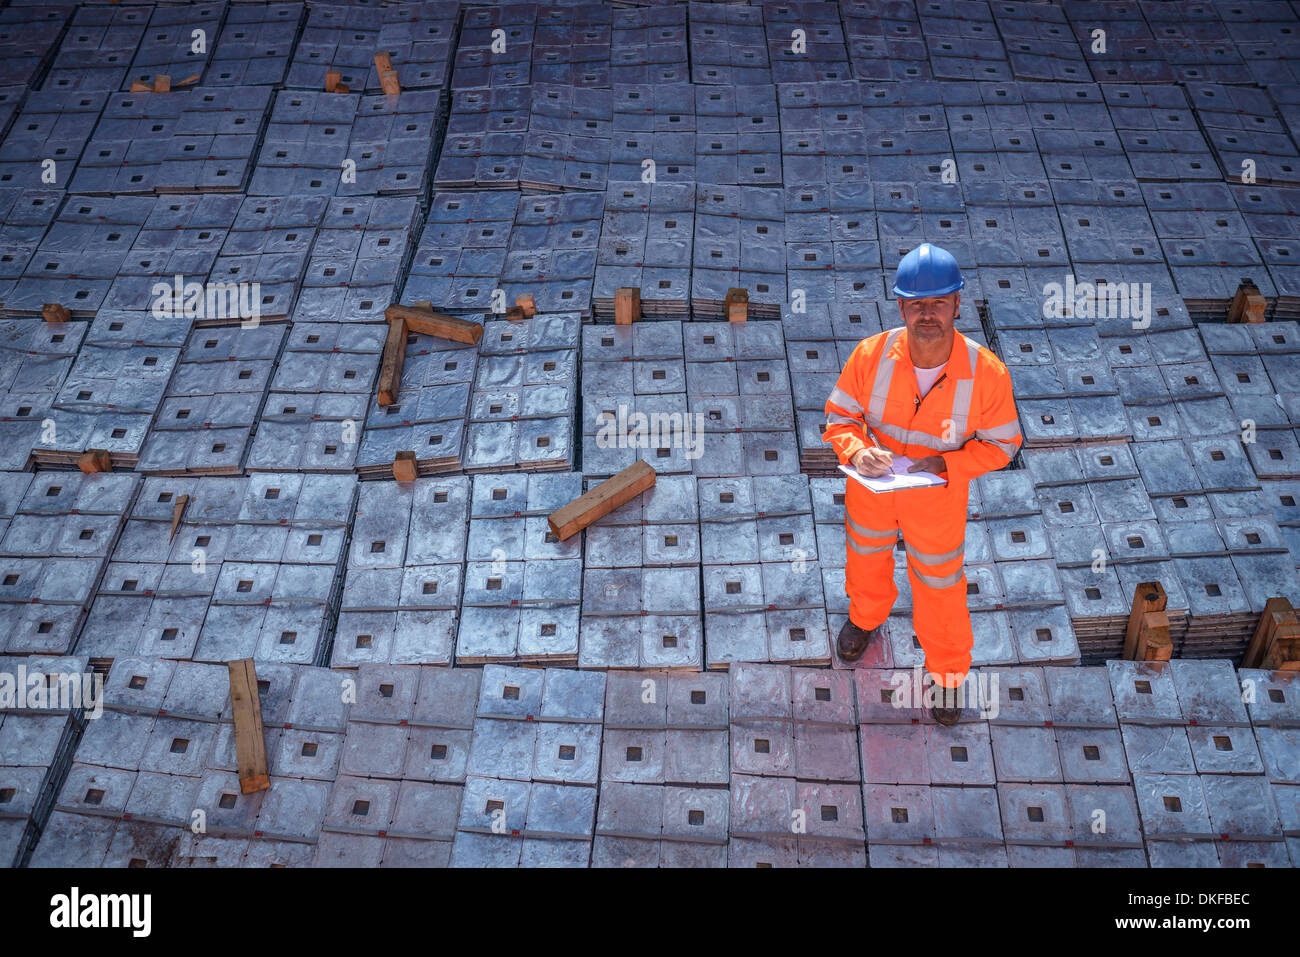 Worker in reflective workwear standing on metal alloy cargo in ship's hold, portrait Stock Photo